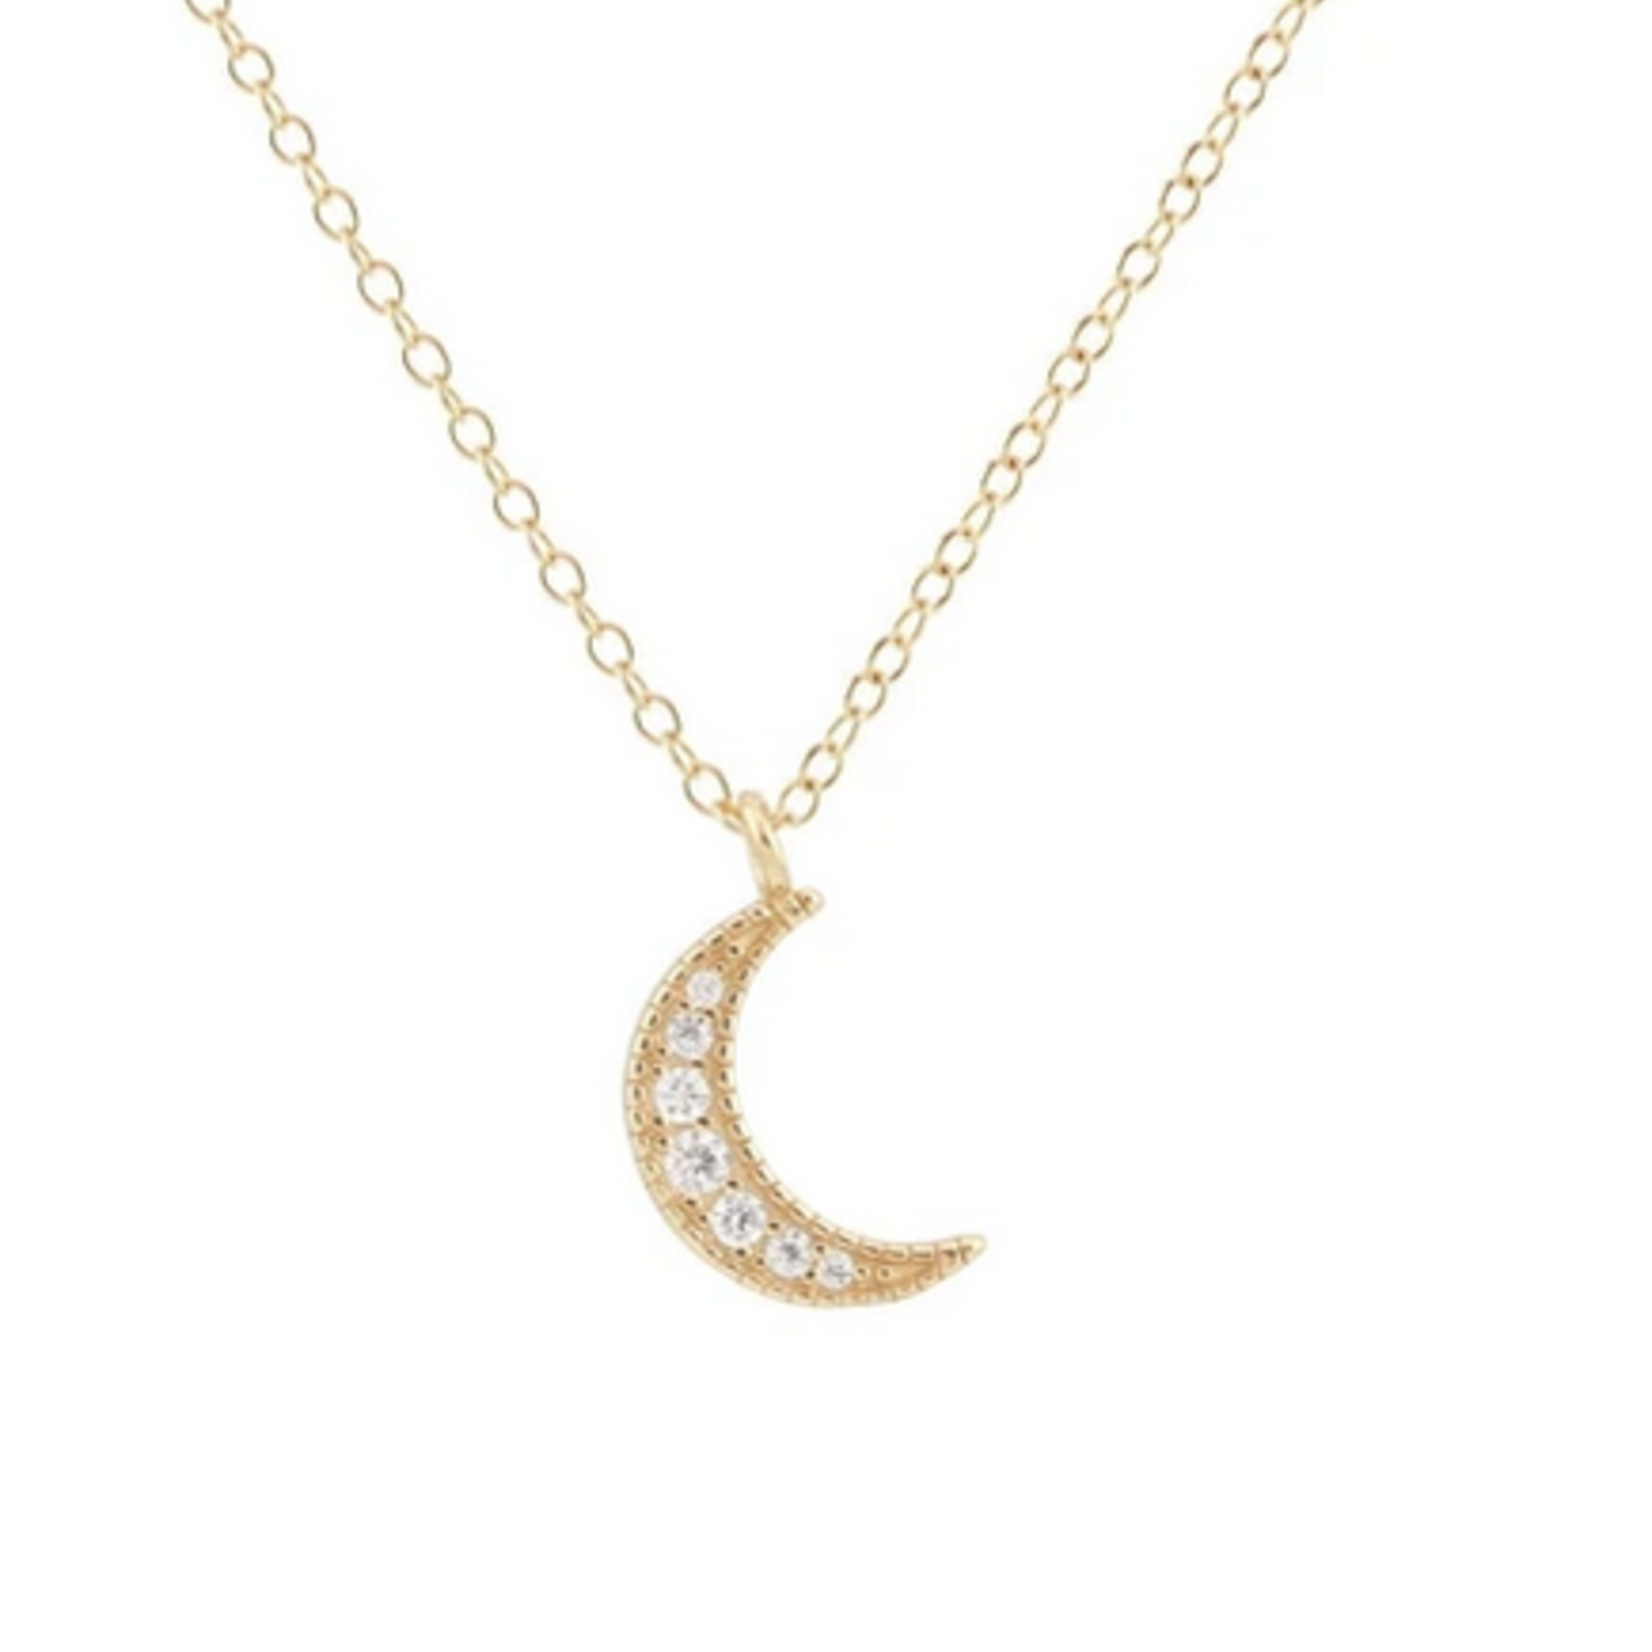 KRIS NATIONS Crescent Moon Crystal Charm Necklace